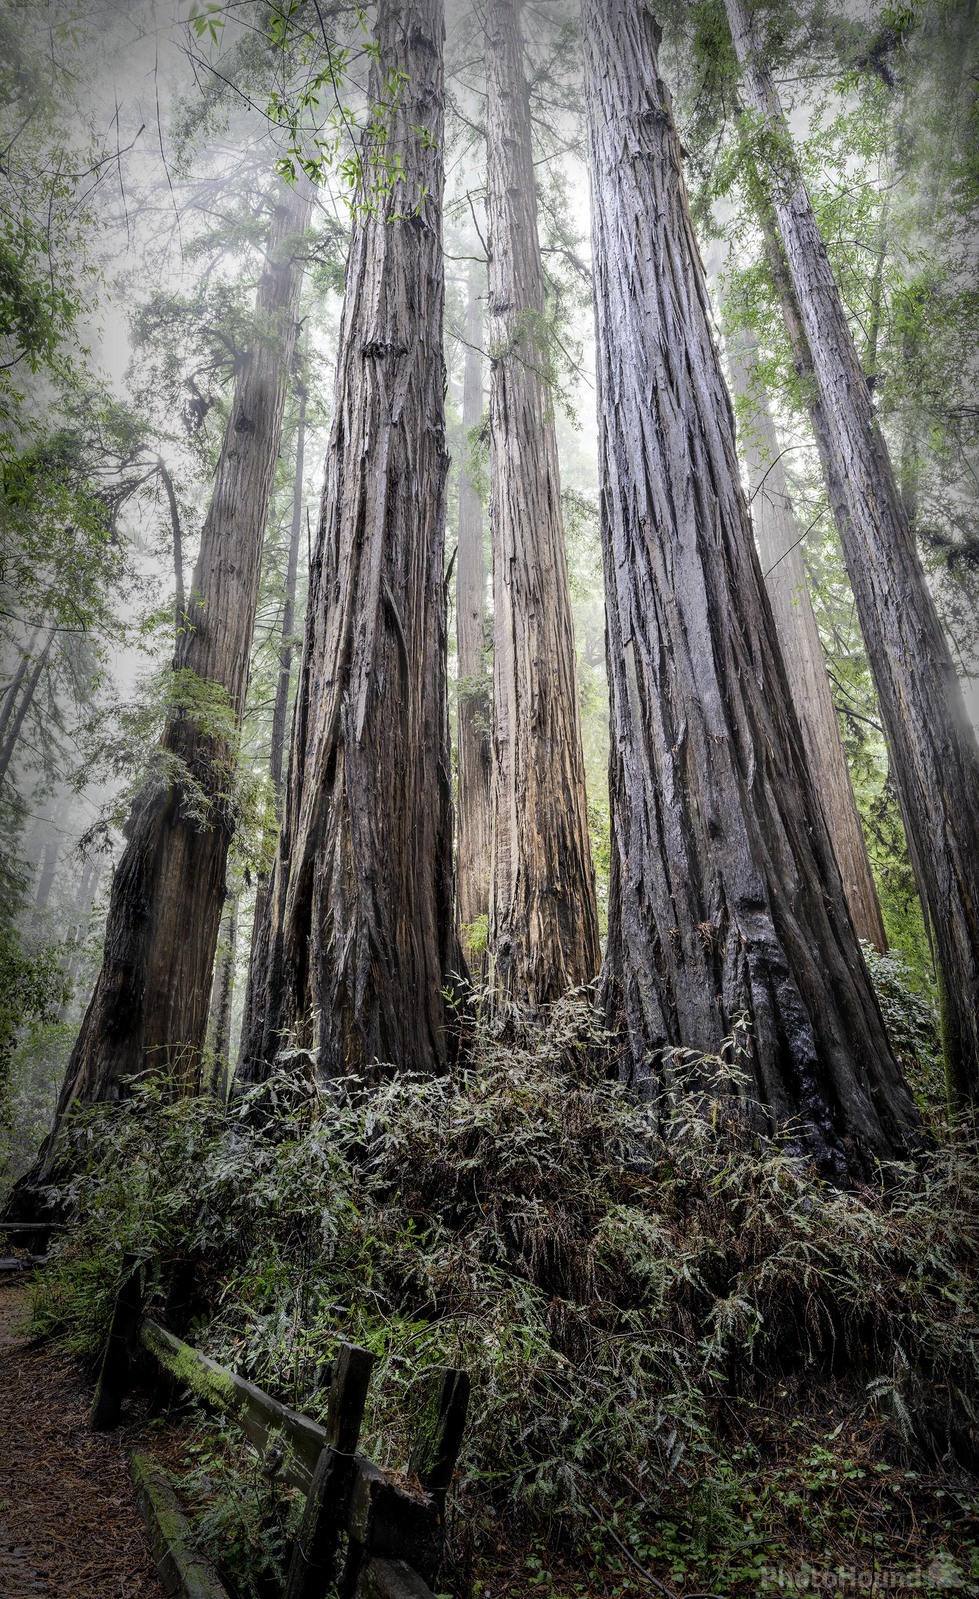 Image of Henry Cowell Redwoods State Park by Doug Hoover